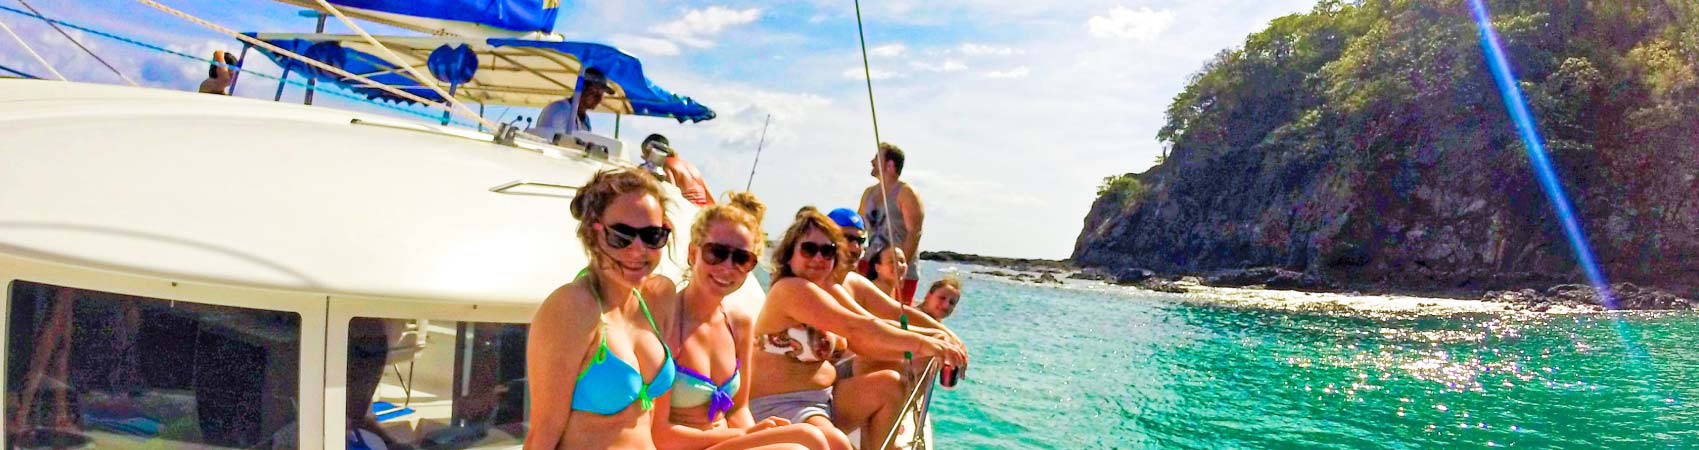 People enjoying a unique day at sea, wedding celebrations and private parties on a catamaran